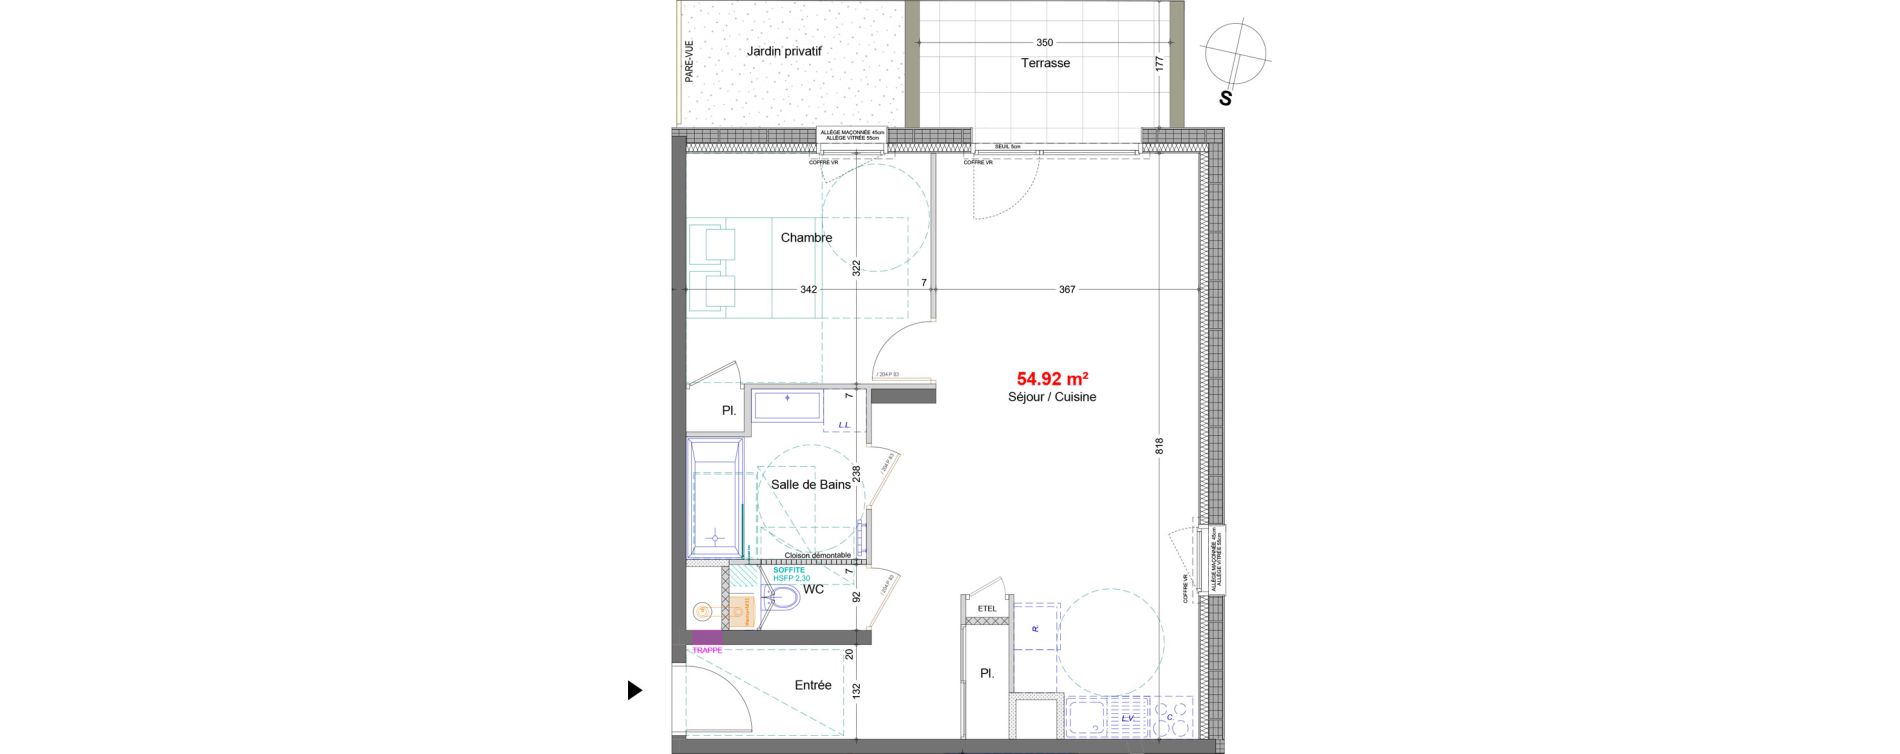 Appartement T2 de 54,92 m2 &agrave; &Eacute;pagny Epagny metz-tessy